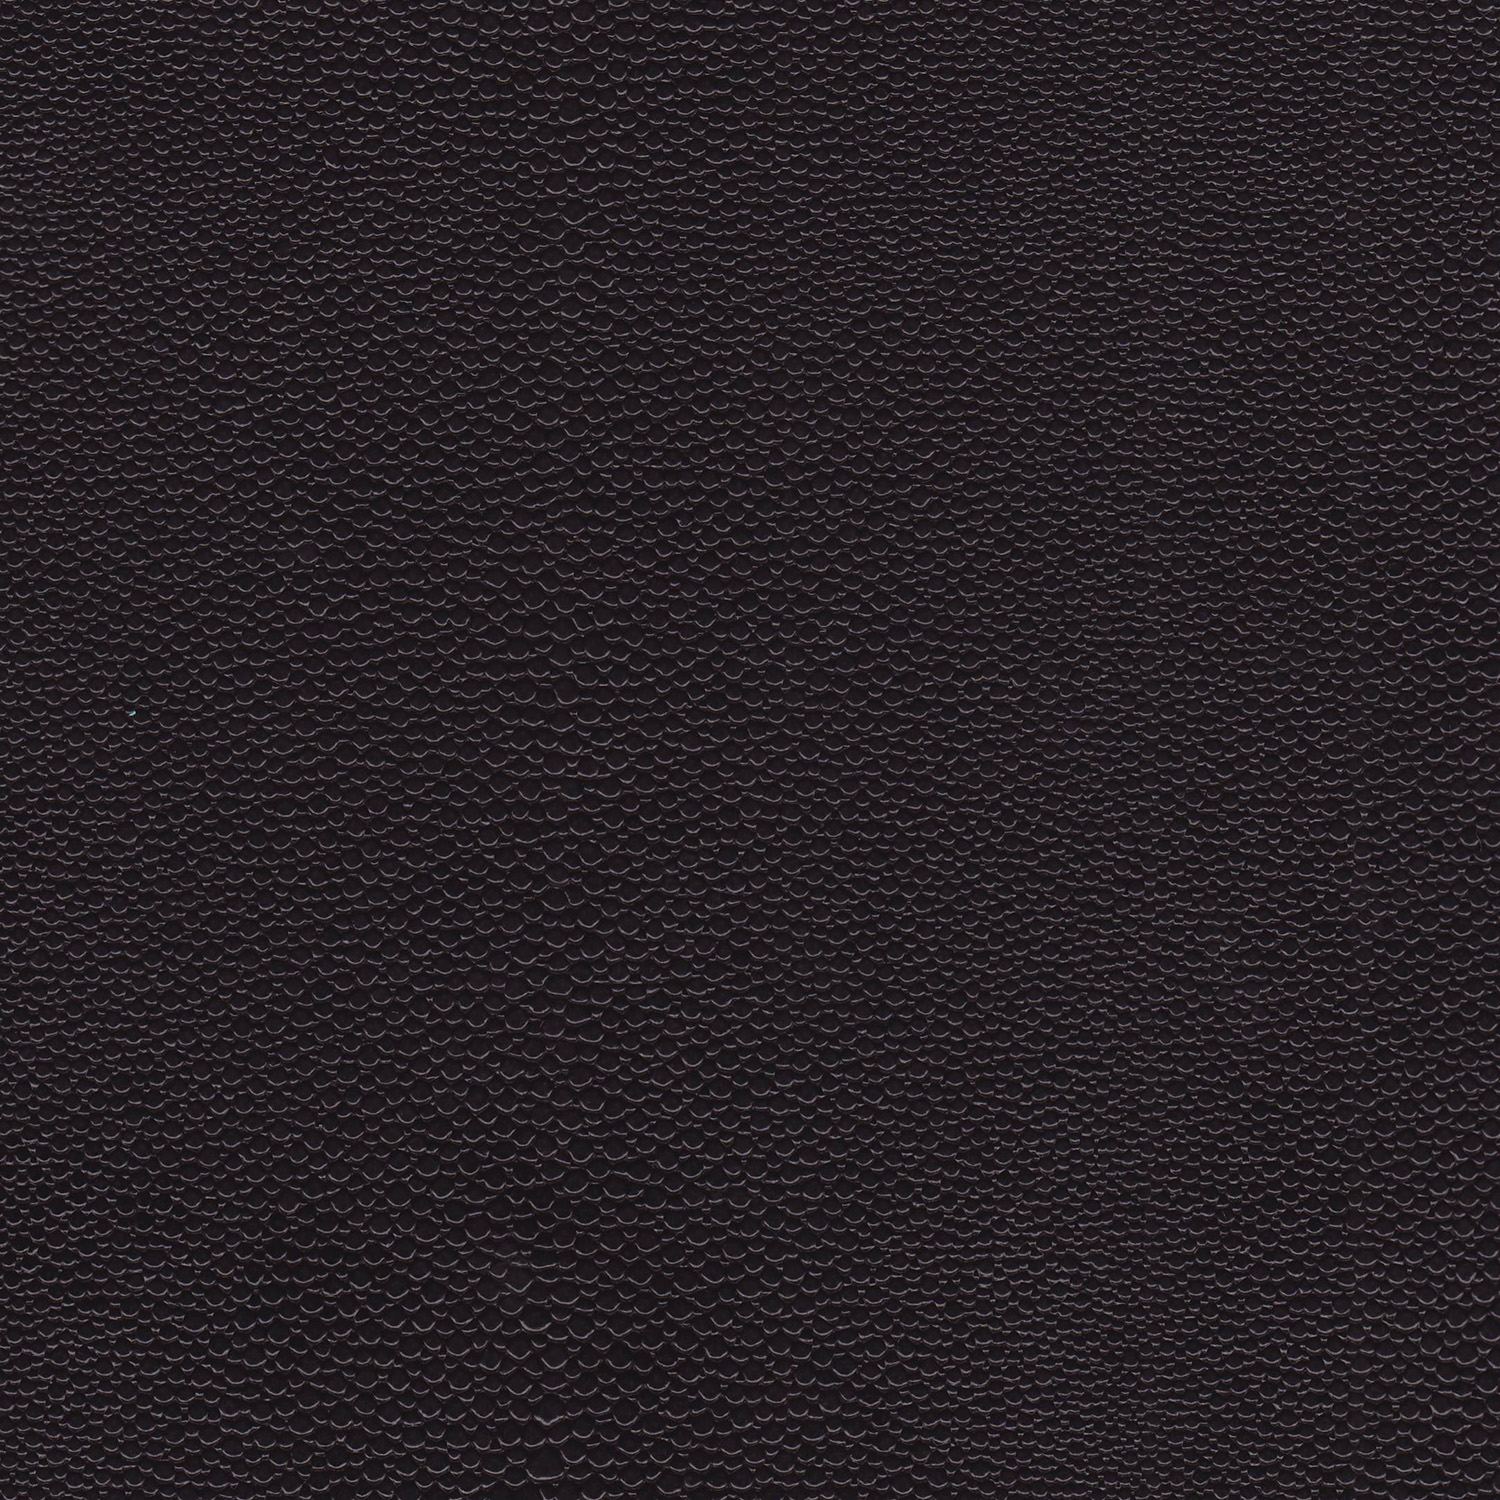 MI-EEL/BLACK - Faux Leathers Fabric Suitable For Upholstery And Pillows Only.   - Dallas